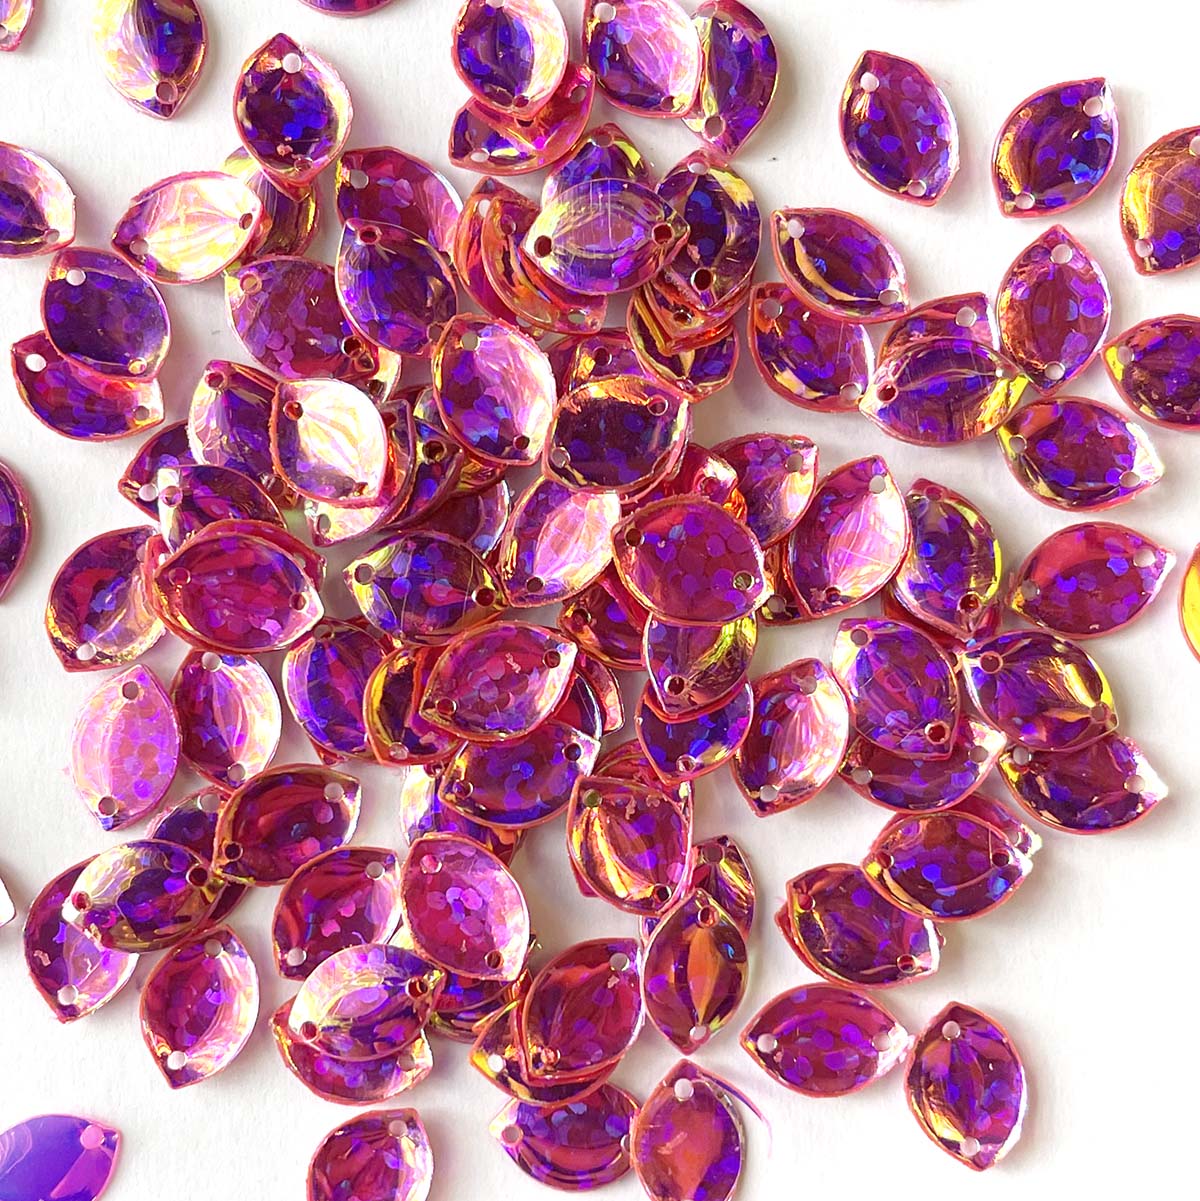 www.colourstreams.com.au Colour Streams Sequins Embellishments Costumes Mardi Gras Dancing Ballet Theatre Shows Drag Queen Bling Australia Canada NZ USA  Leaf Iridescent Reflective Shiny Pink Purple Yellow Lights Sequin 10mm x 7mm S233